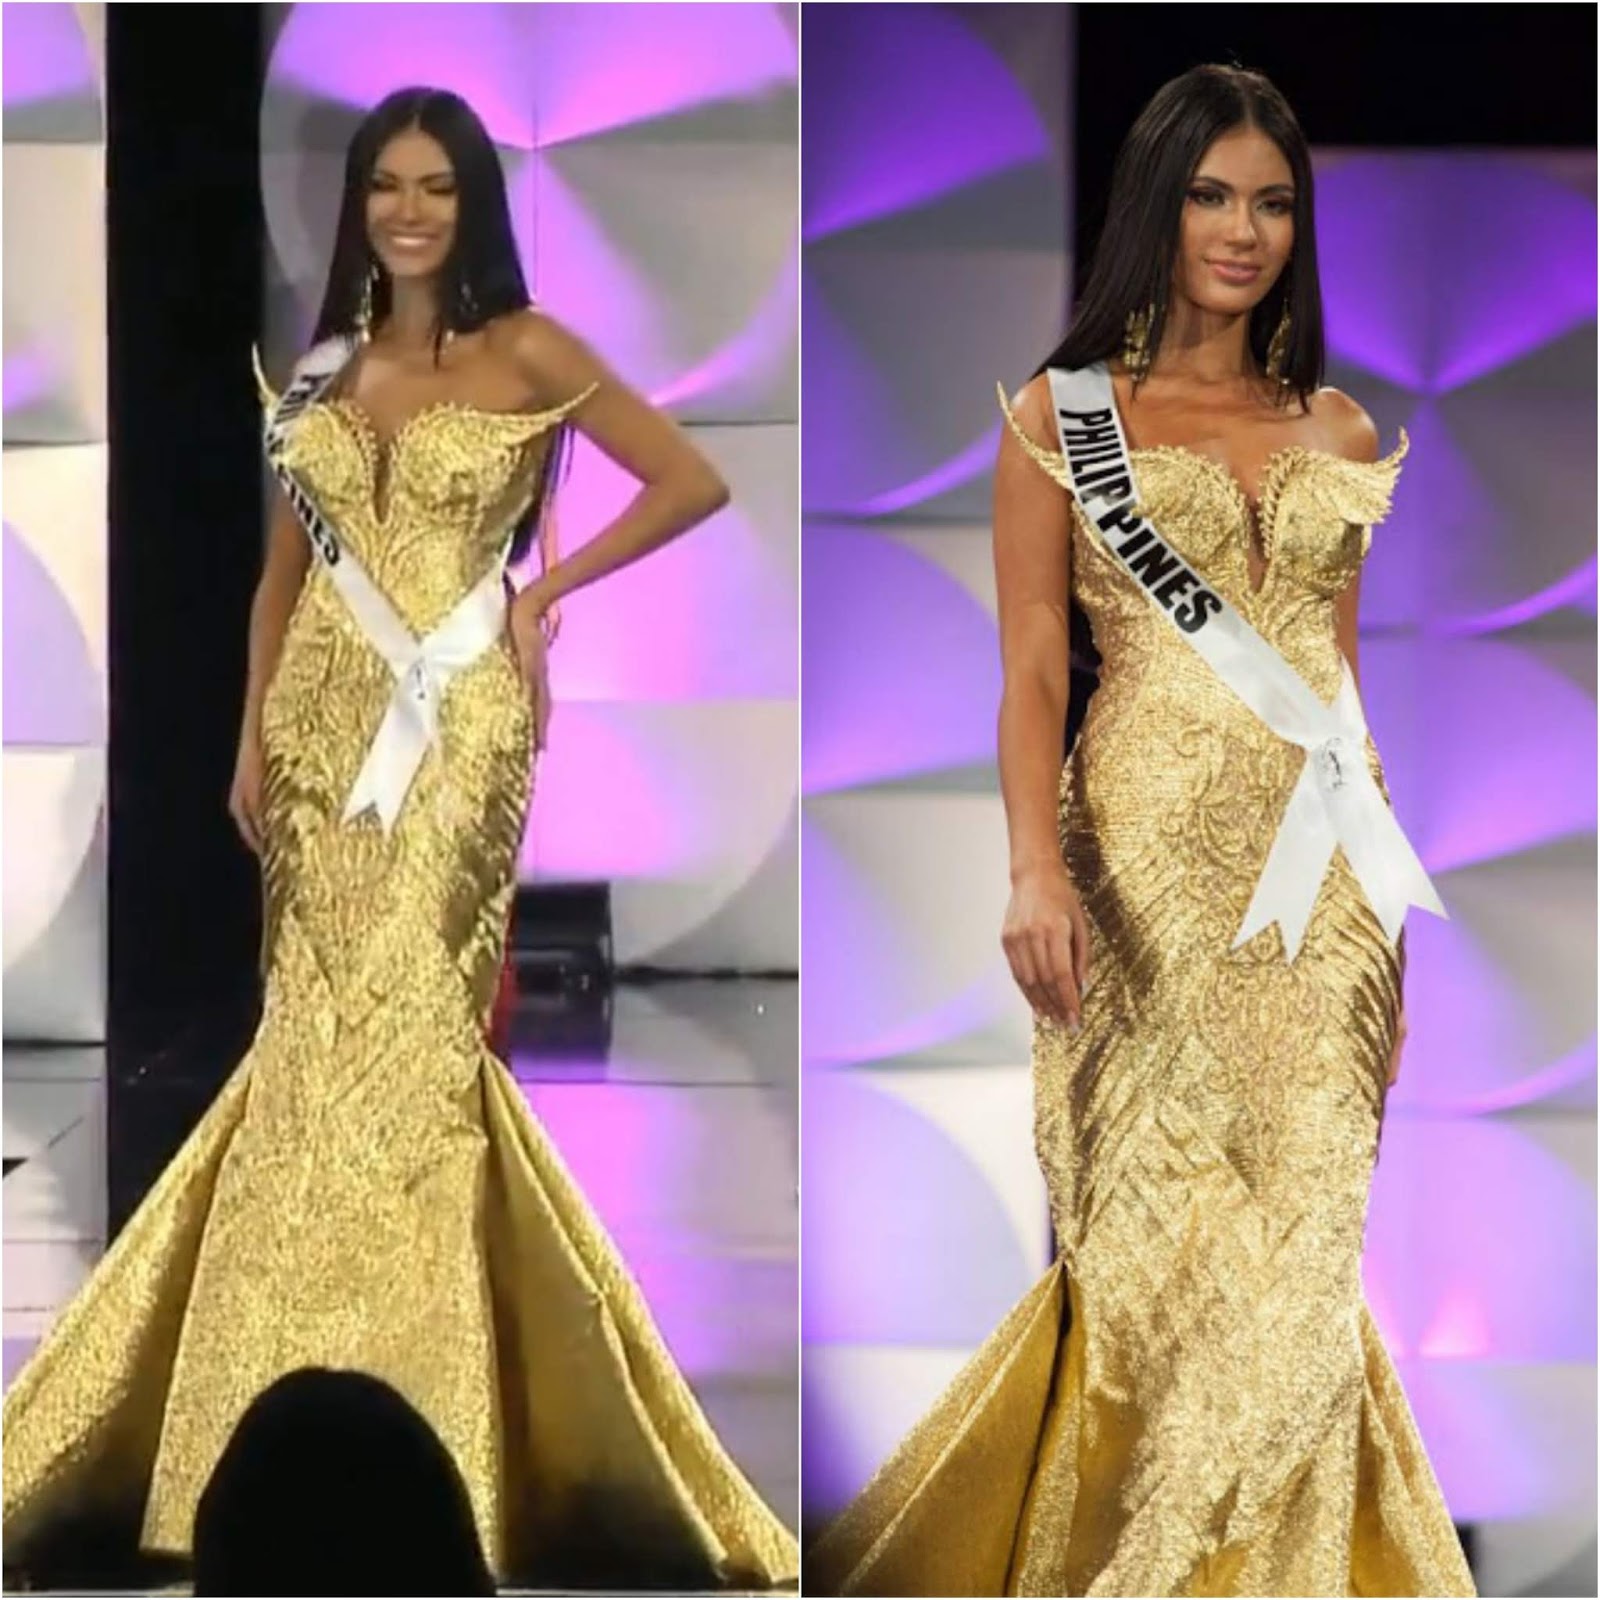 Top 10 gowns of pageant year 2021 - Missosology